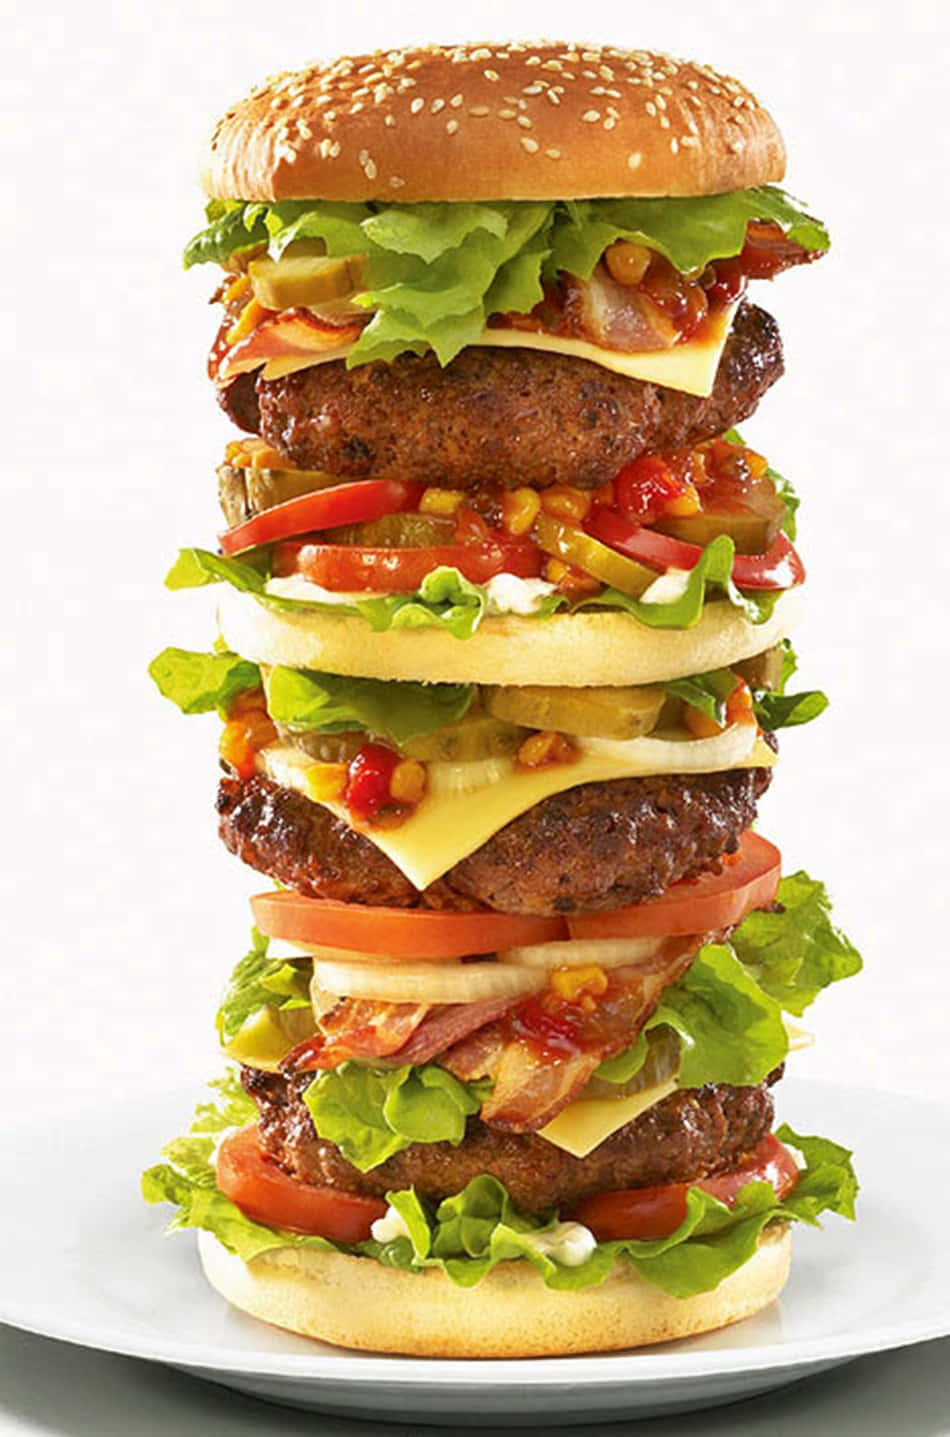 A Burger With Lettuce, Tomatoes, And Bacon On Top